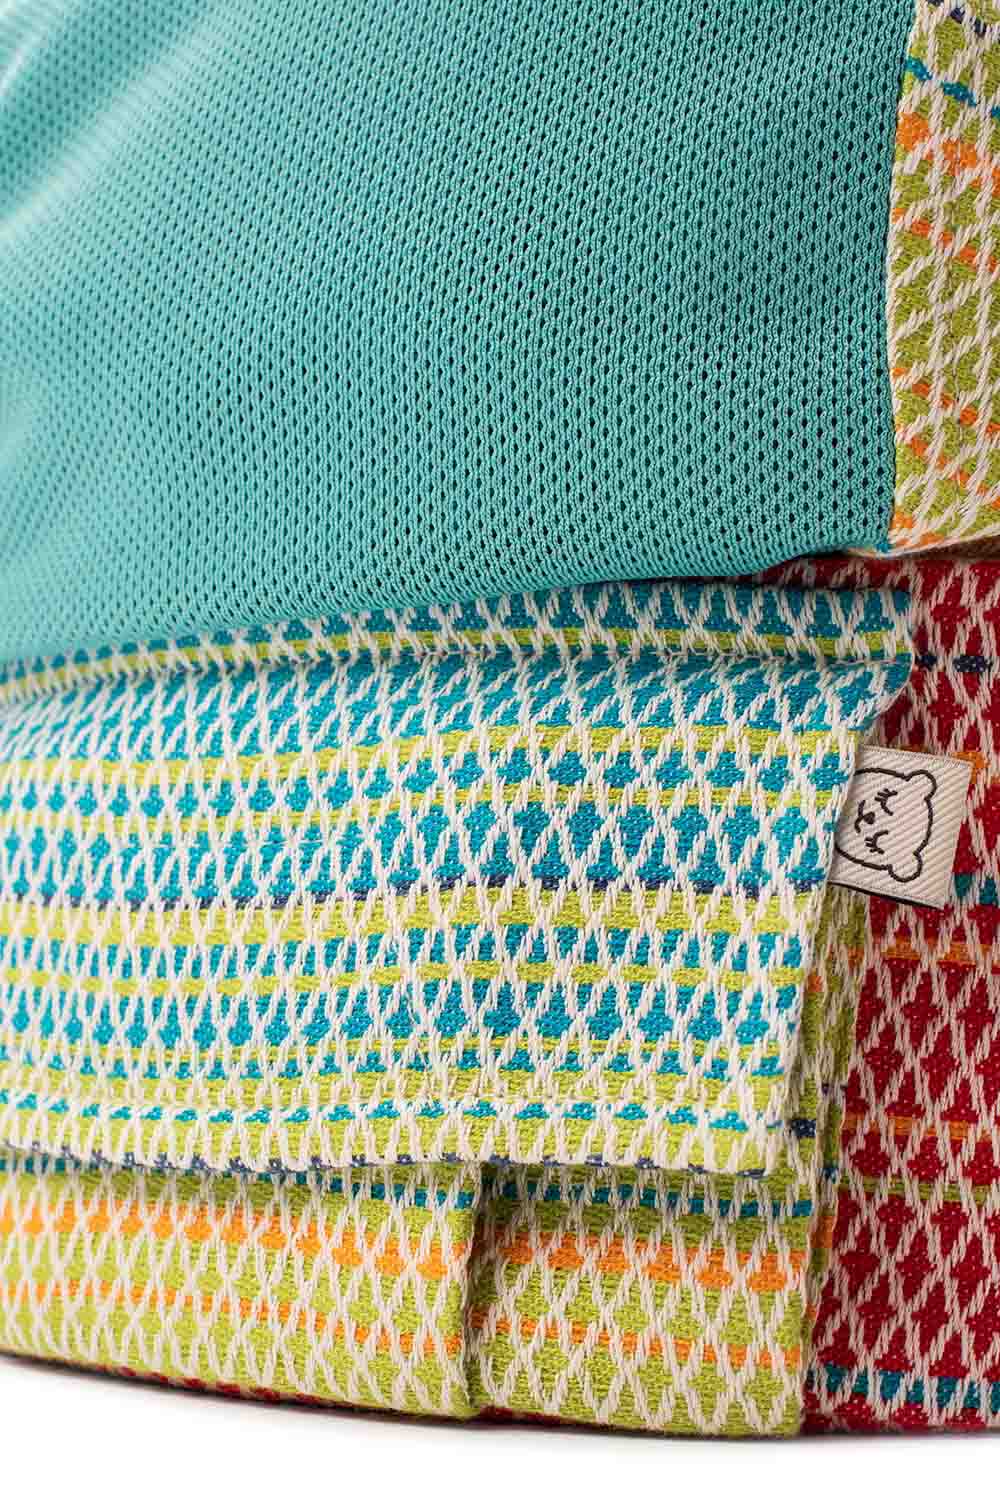 Coast Pastel Rainbow - Signature Woven Free-to-Grow Mesh Baby Carrier